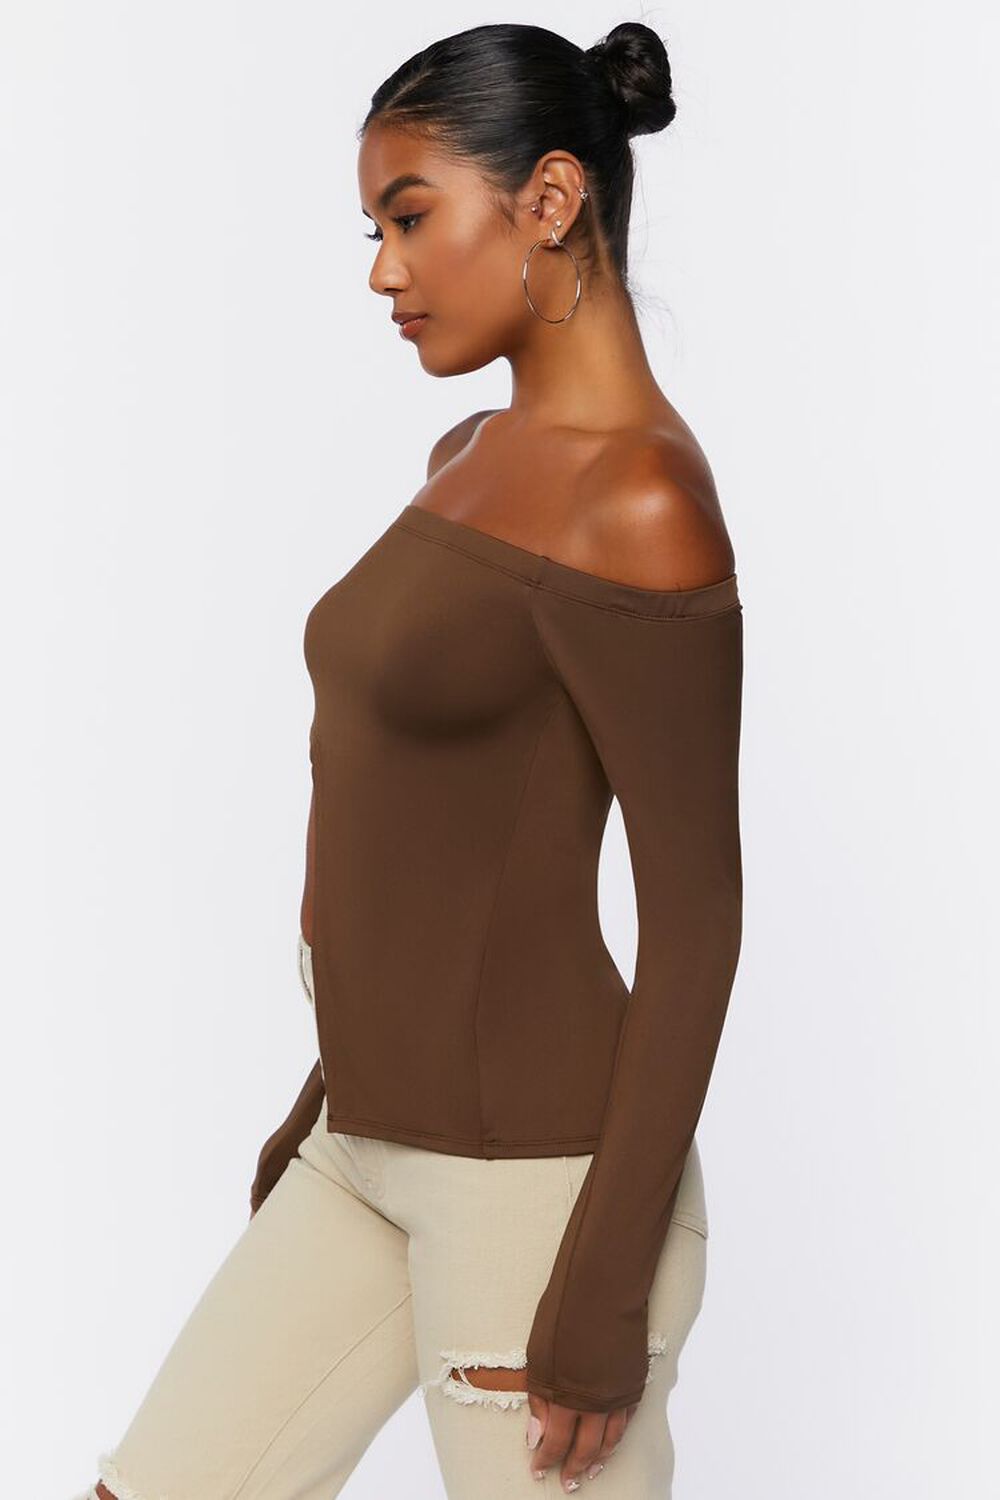 CHOCOLATE Asymmetrical Off-the-Shoulder Top, image 2